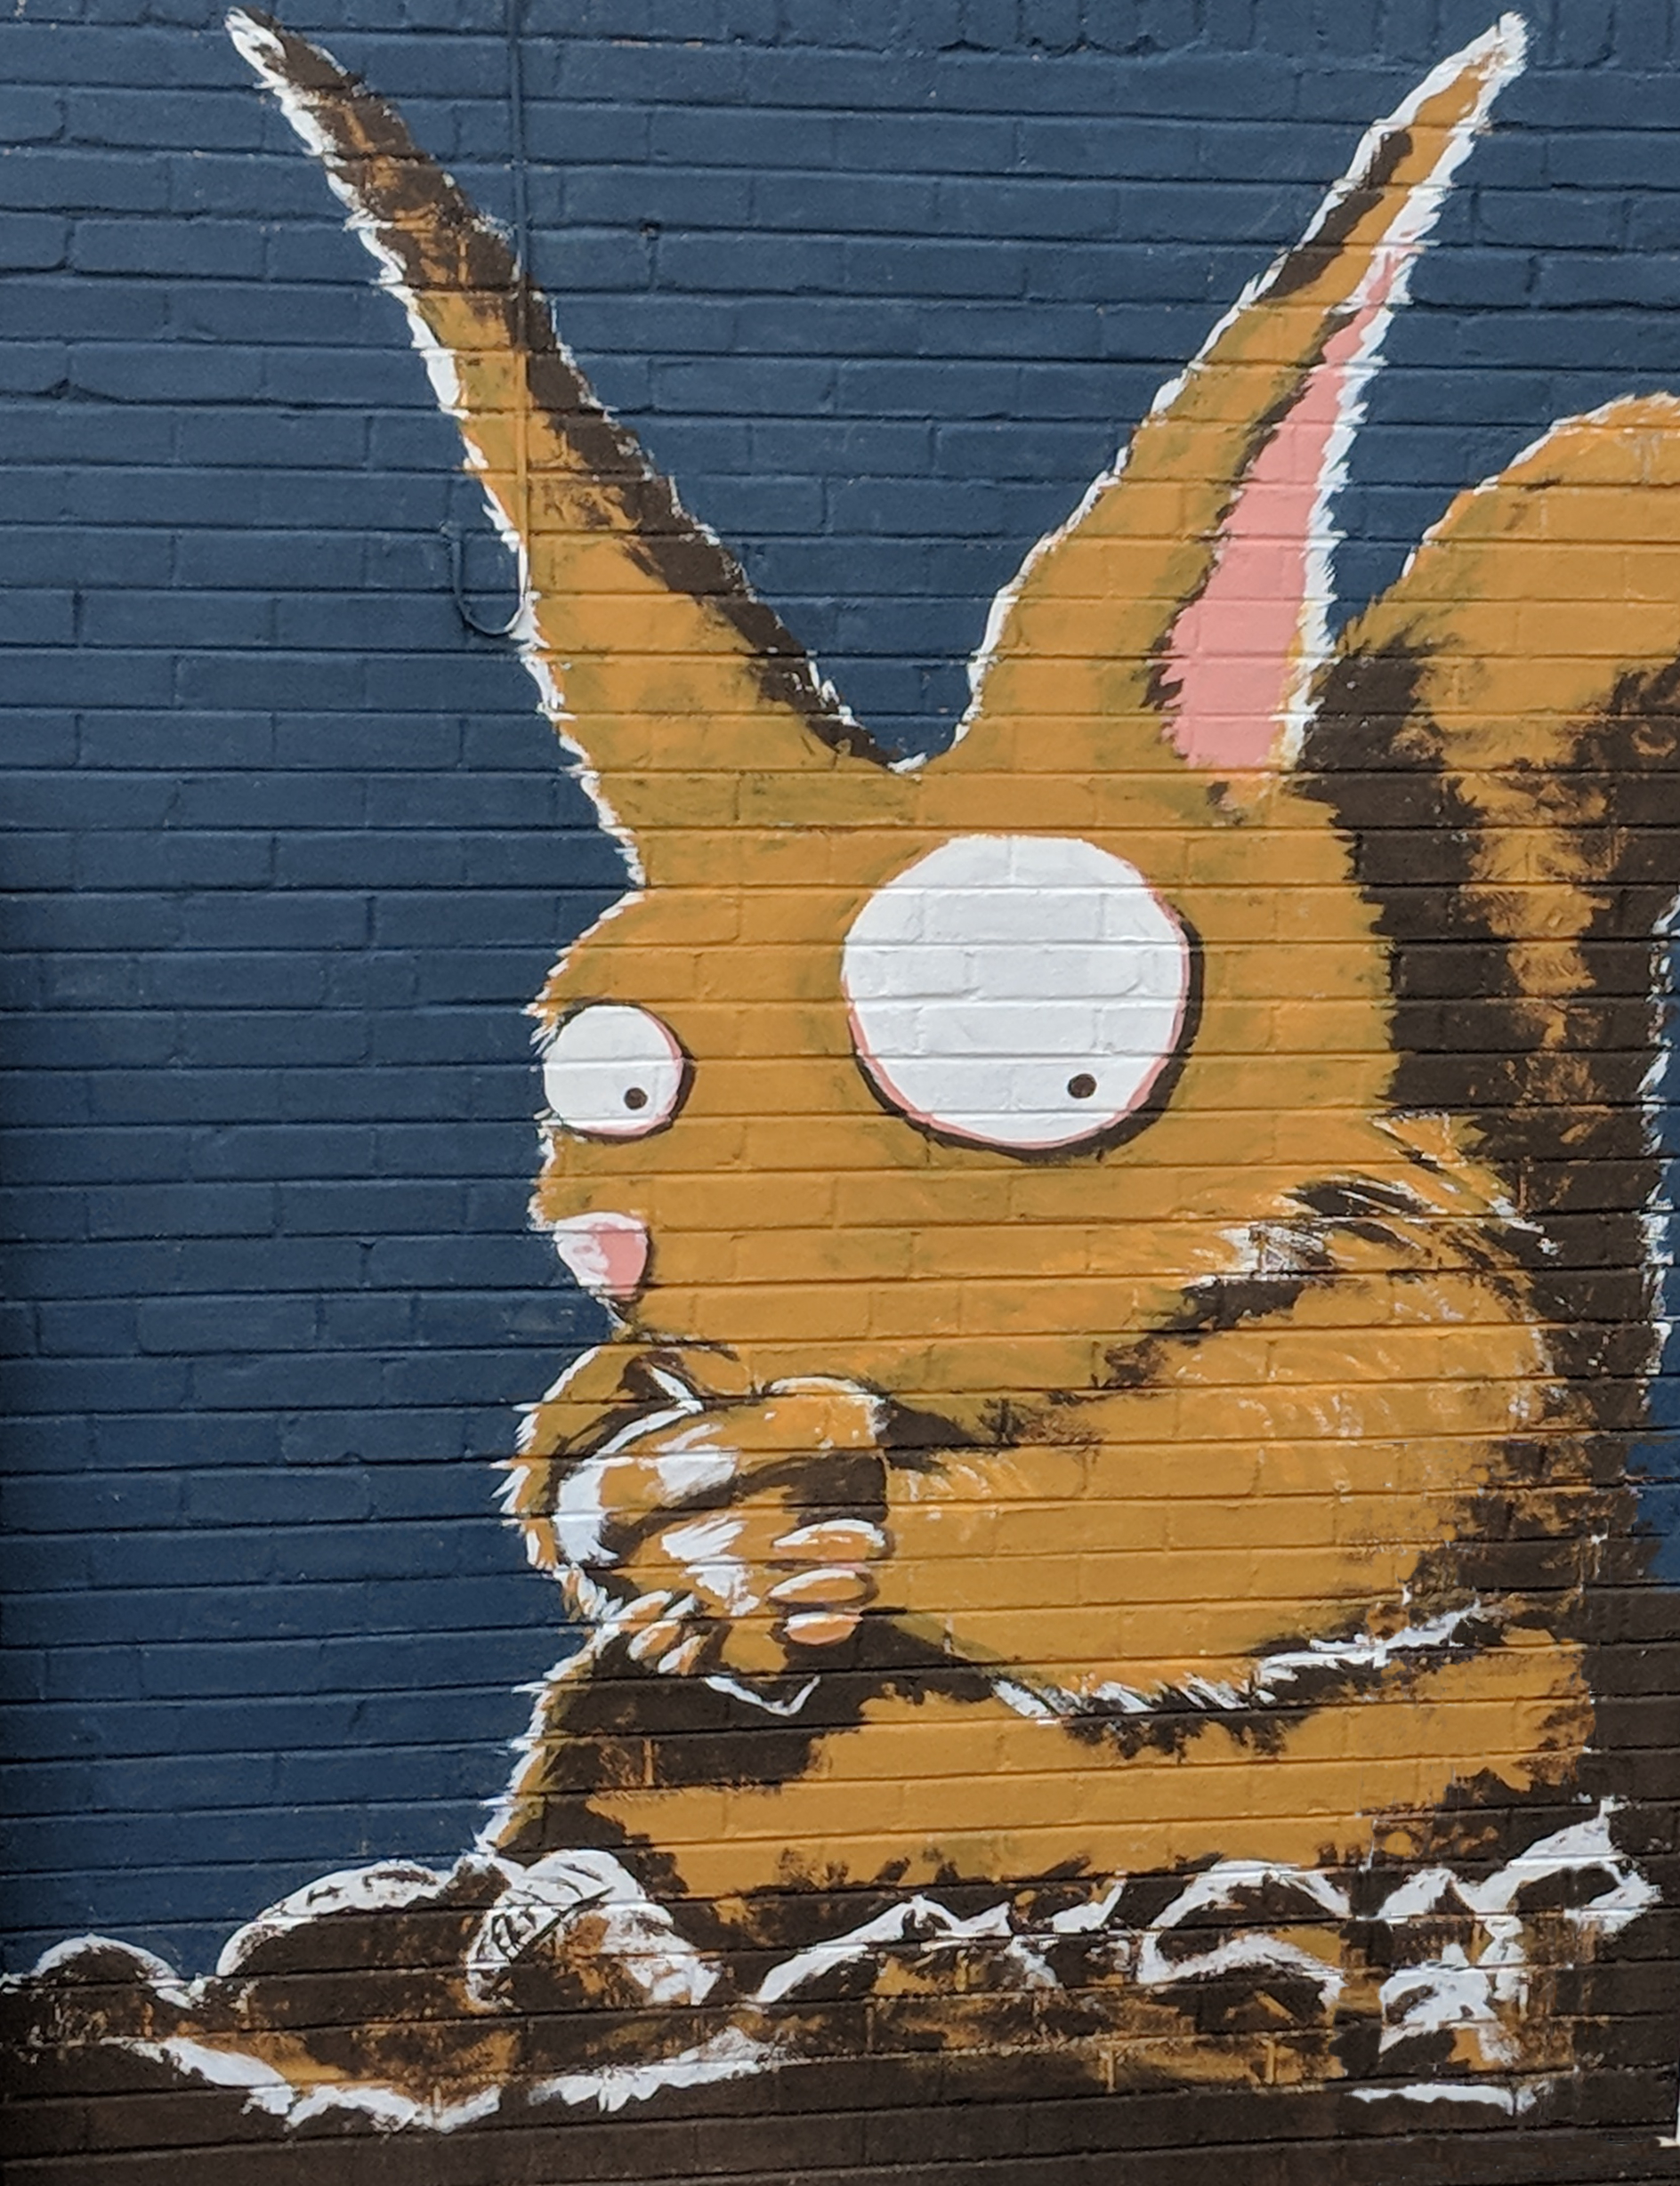 A mural of a squirrel that I painted on my garage.